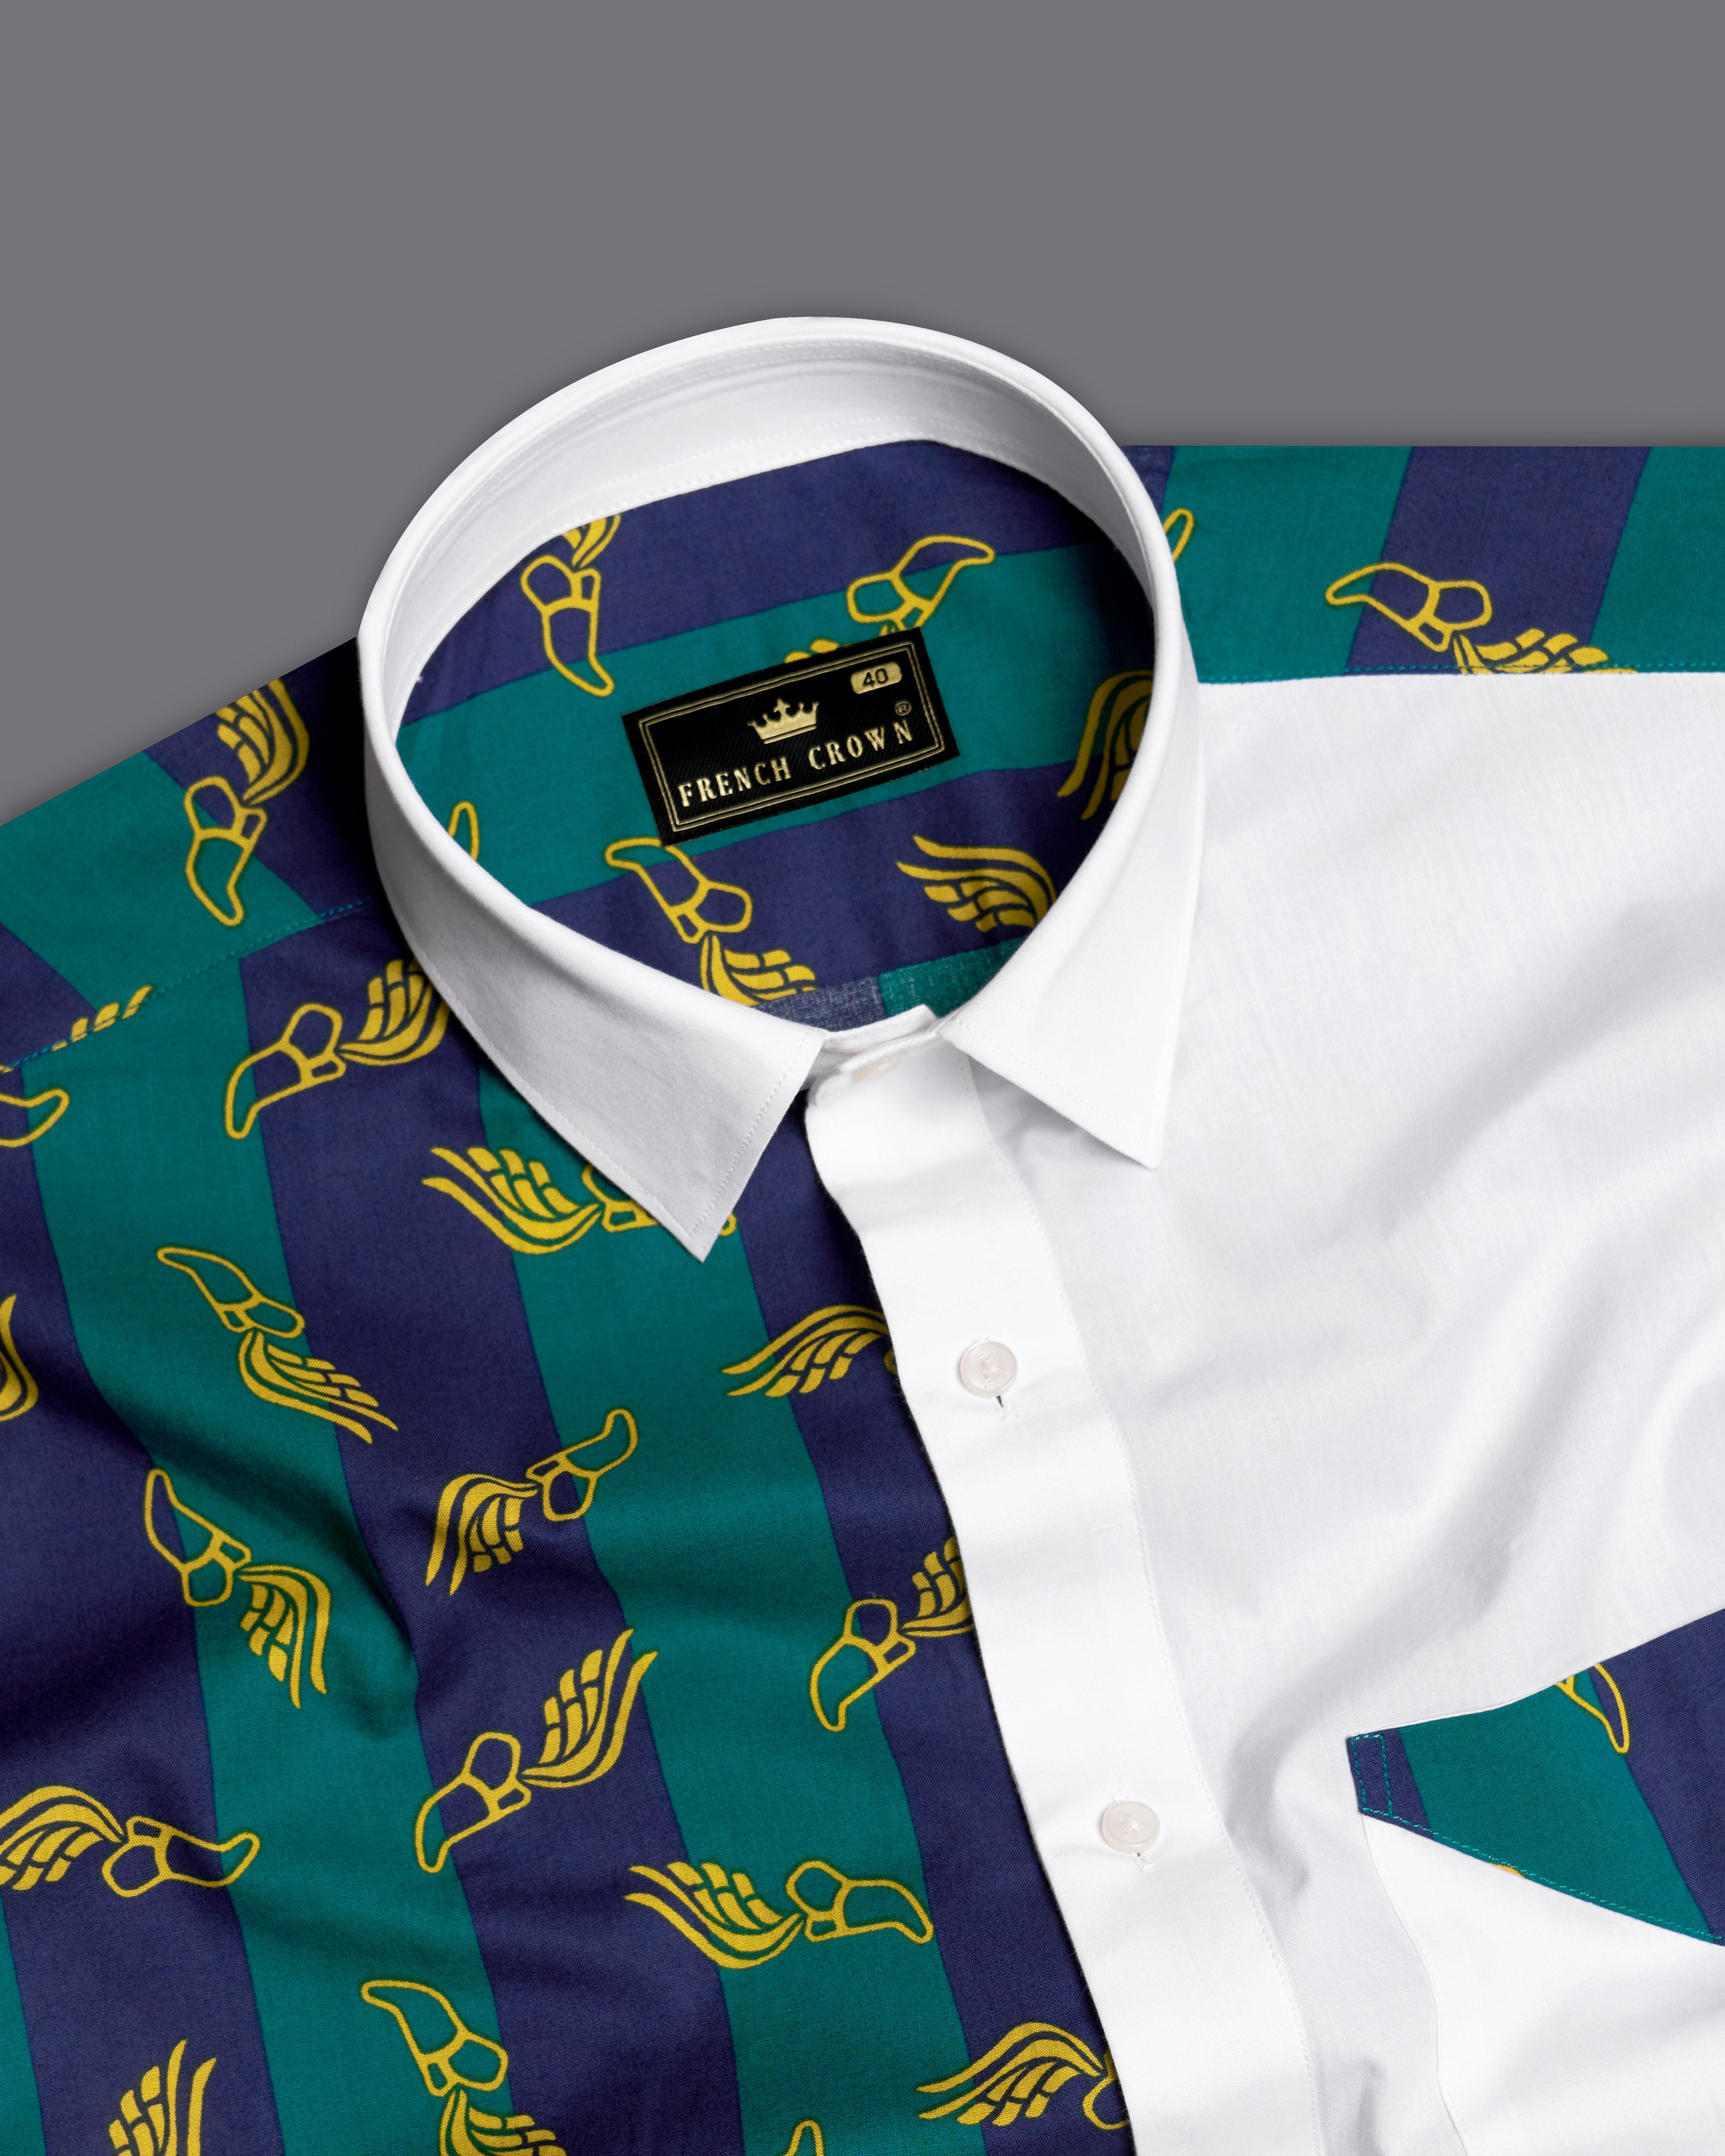 Bright White with Deep Teal Green and Cloud Burst Blue Printed Premium Cotton Designer Shirt 9767-P364-38, 9767-P364-H-38, 9767-P364-39, 9767-P364-H-39, 9767-P364-40, 9767-P364-H-40, 9767-P364-42, 9767-P364-H-42, 9767-P364-44, 9767-P364-H-44, 9767-P364-46, 9767-P364-H-46, 9767-P364-48, 9767-P364-H-48, 9767-P364-50, 9767-P364-H-50, 9767-P364-52, 9767-P364-H-52